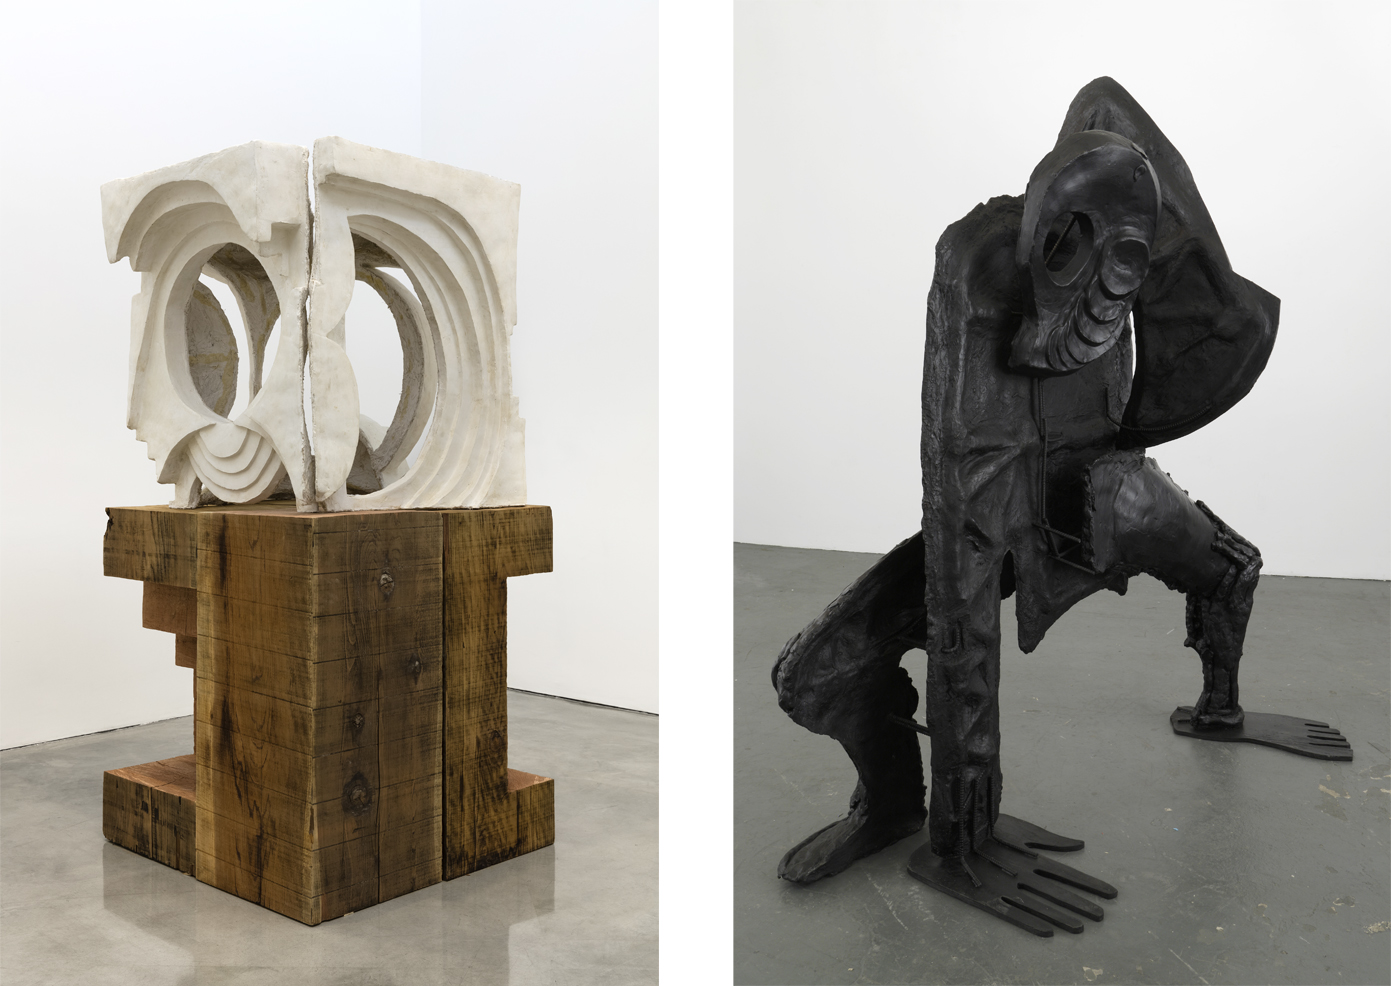 Left: Thomas Houseago, 'Design for a Museum,' 2017. Photography by Fredrik Nilsen. Courtesy of the artist and Gagosian Gallery.Right: Thomas Houseago, 'Sprawling Octopus Man,' 2009. Photography by Joshua White. Courtesy of the artist and Hauser & Wirth.